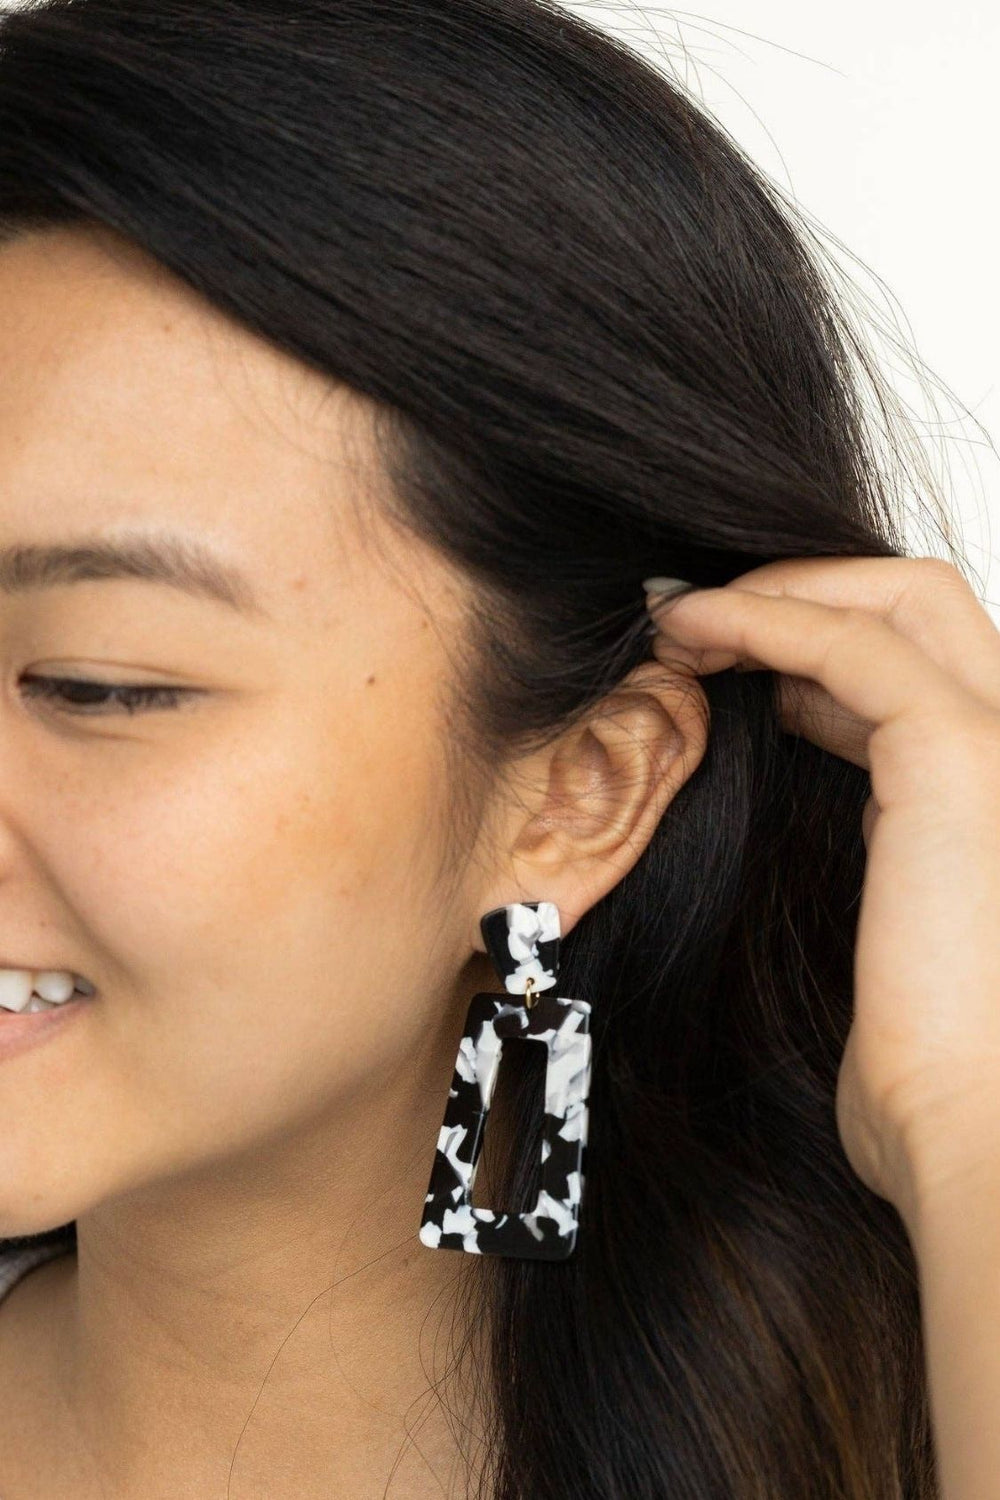 Black and White Geometric Earrings - Inspired Eye Boutique